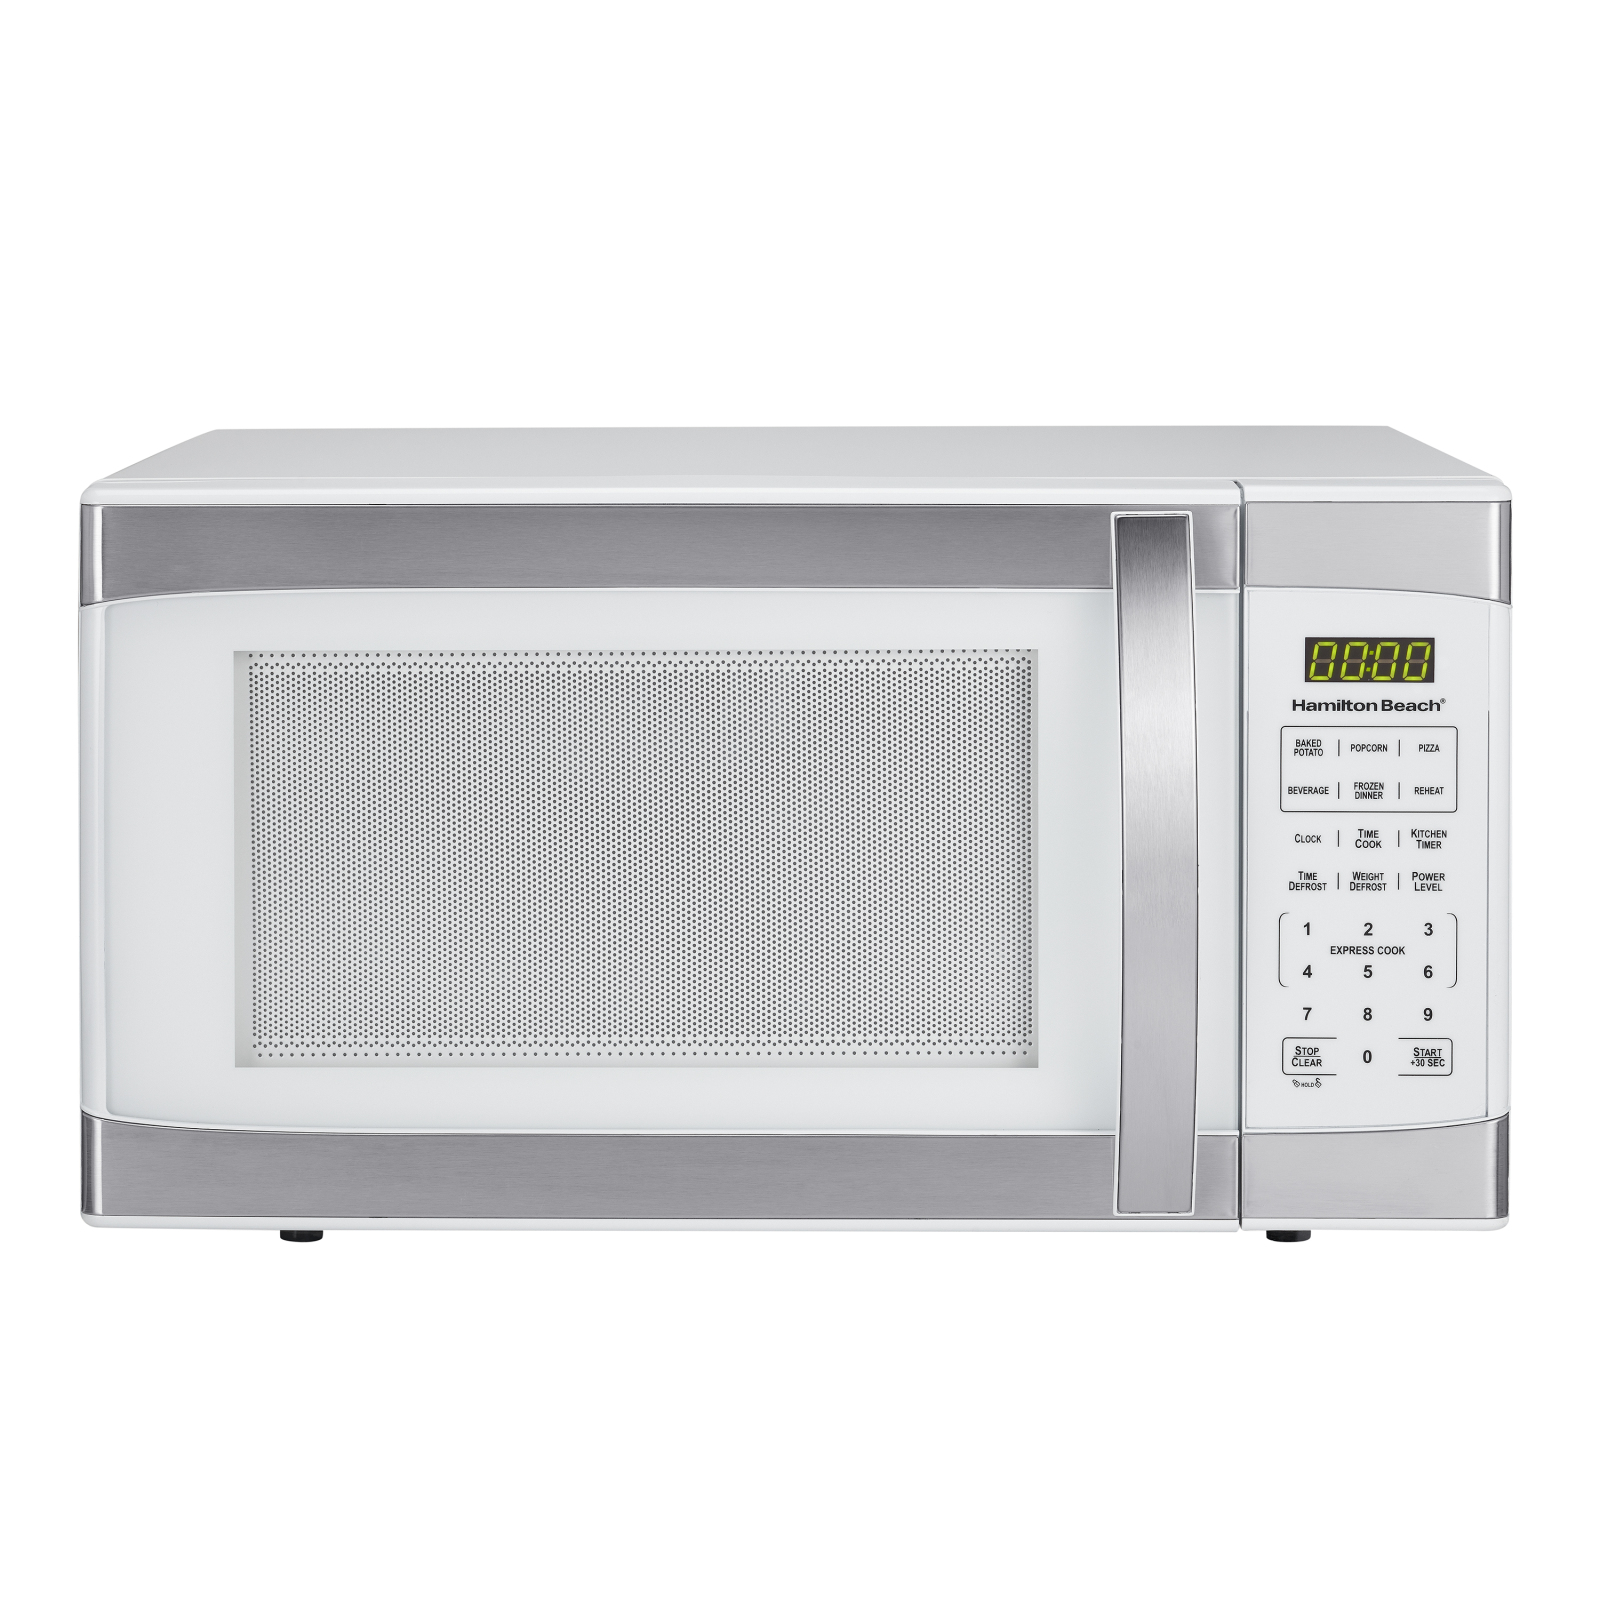 Hamilton Beach 1.1 Cu.ft White with Stainless Steel Digital Microwave Oven - image 2 of 5